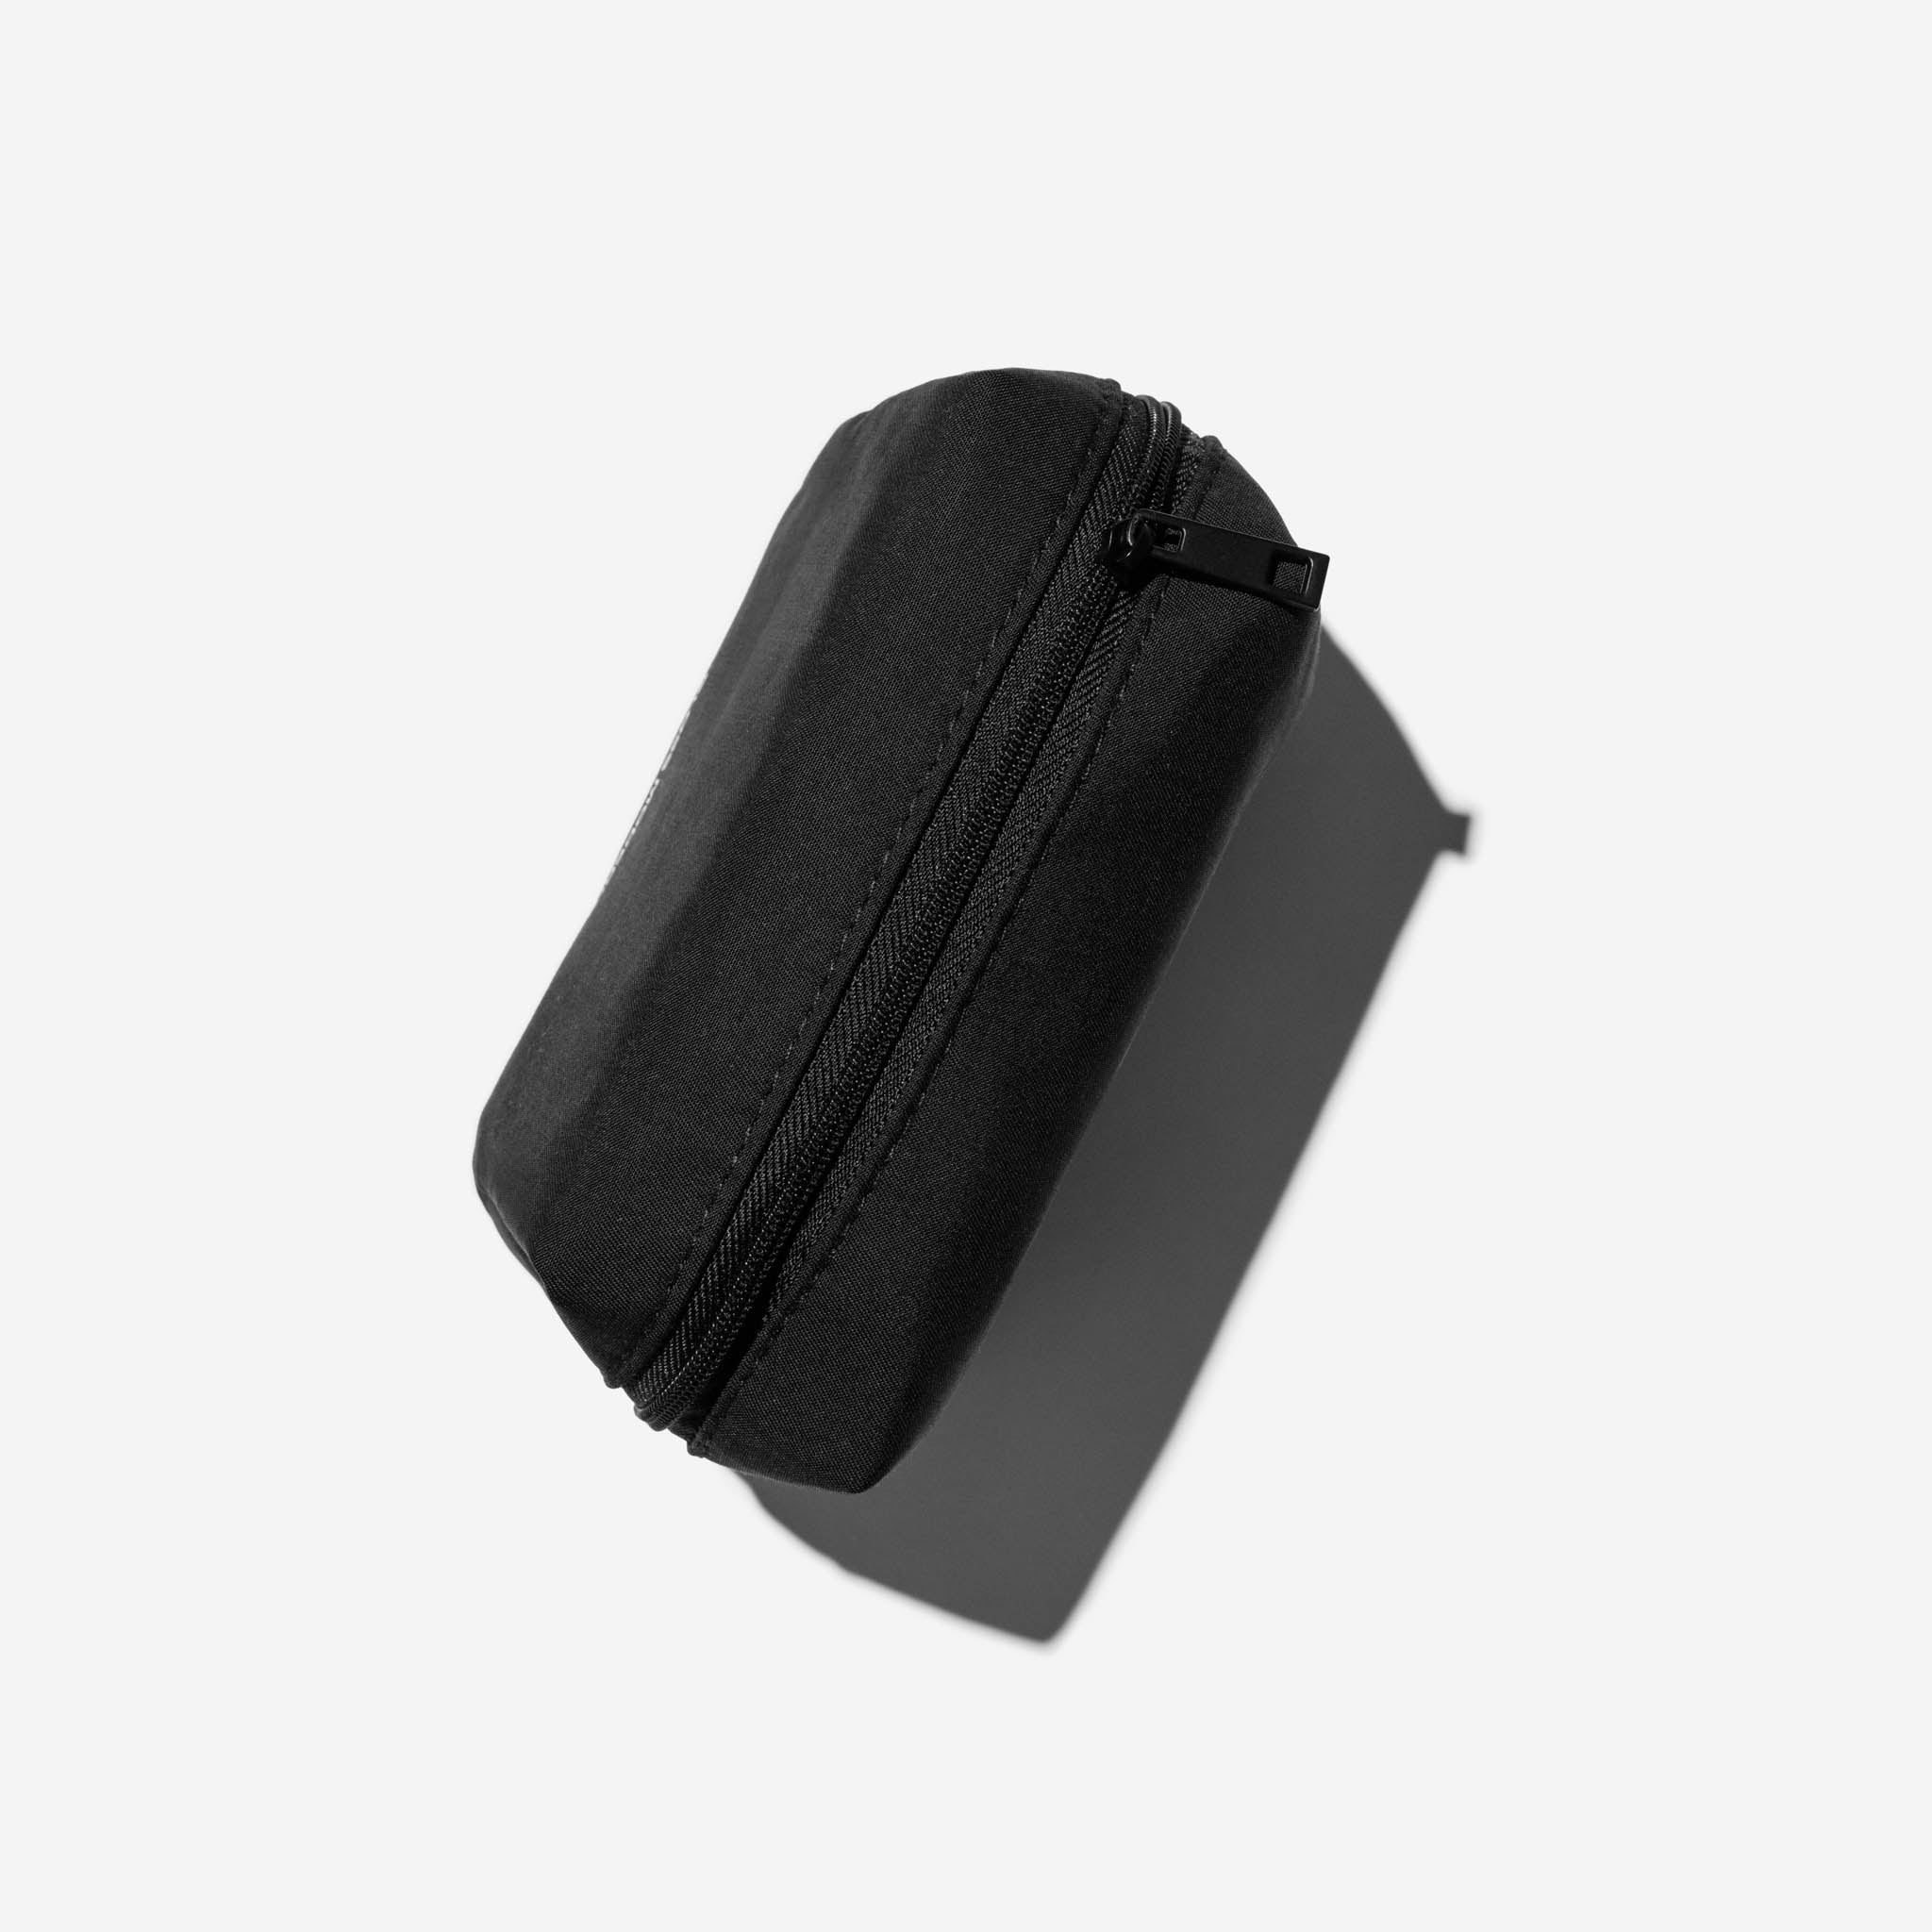 Sustainable Travel Pouch for Essentials